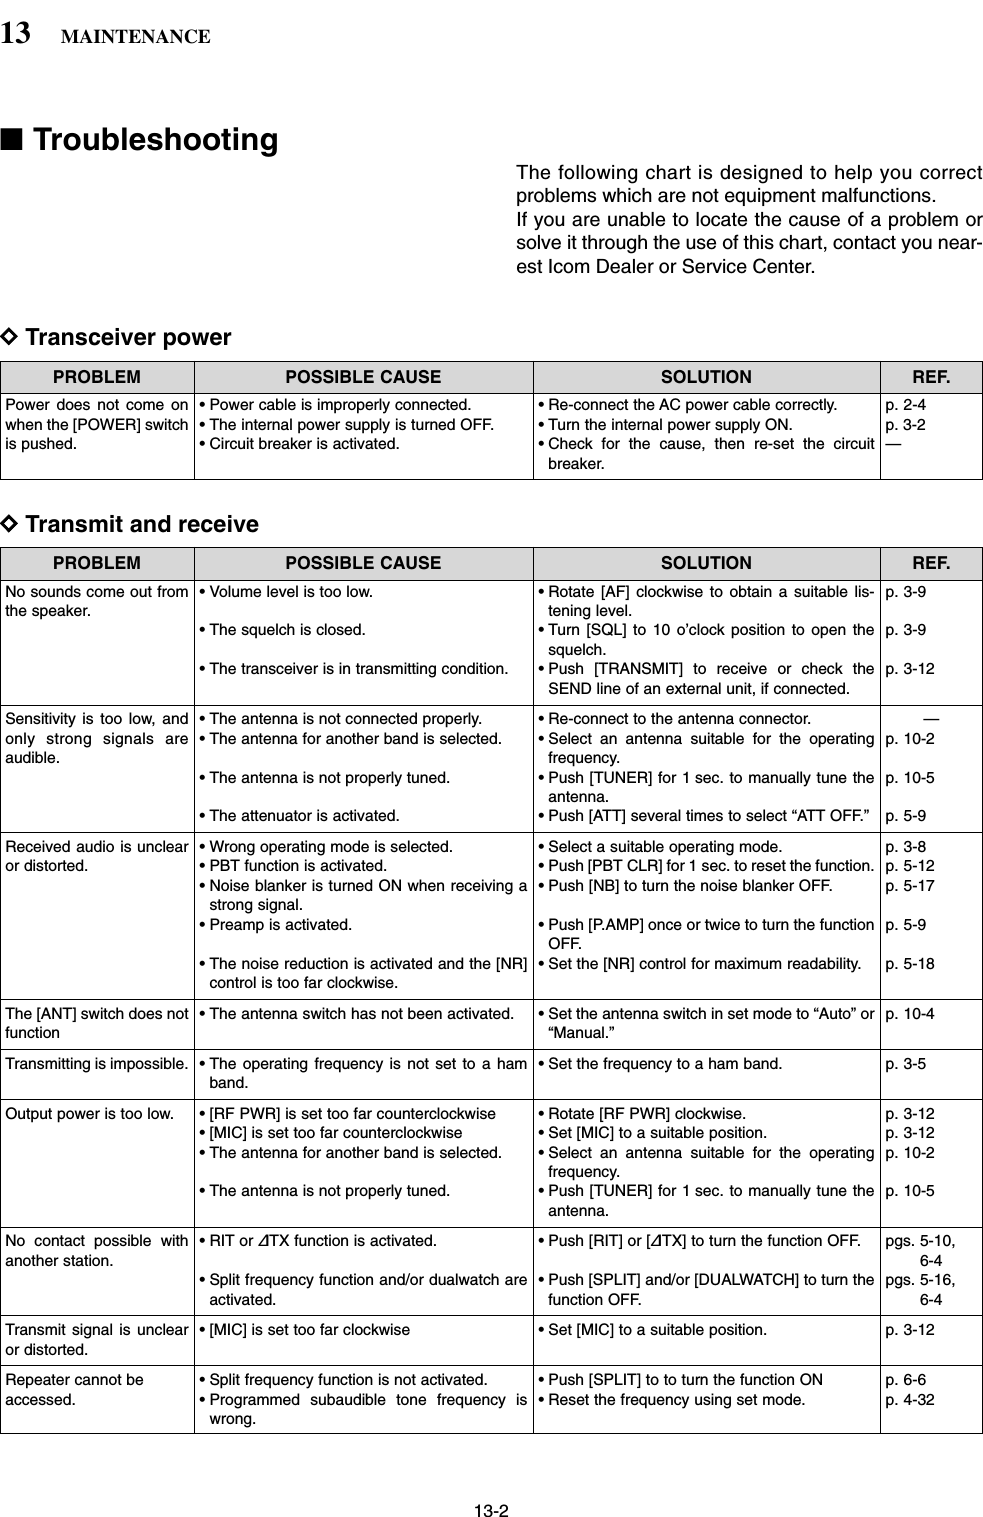 ■TroubleshootingThe following chart is designed to help you correctproblems which are not equipment malfunctions.If you are unable to locate the cause of a problem orsolve it through the use of this chart, contact you near-est Icom Dealer or Service Center.DTransceiver powerDTransmit and receivePROBLEM POSSIBLE CAUSE SOLUTION REF.No sounds come out fromthe speaker.Sensitivity is too low, andonly strong signals areaudible.Received audio is unclearor distorted.The [ANT] switch does notfunctionTransmitting is impossible.Output power is too low.No contact possible withanother station.Transmit signal is unclearor distorted.Repeater cannot beaccessed.• Volume level is too low.• The squelch is closed.• The transceiver is in transmitting condition.• The antenna is not connected properly.• The antenna for another band is selected.• The antenna is not properly tuned.• The attenuator is activated.• Wrong operating mode is selected.• PBT function is activated.• Noise blanker is turned ON when receiving astrong signal.• Preamp is activated.• The noise reduction is activated and the [NR]control is too far clockwise.• The antenna switch has not been activated.• The operating frequency is not set to a hamband.• [RF PWR] is set too far counterclockwise• [MIC] is set too far counterclockwise• The antenna for another band is selected.• The antenna is not properly tuned.• RIT or ∂TX function is activated.• Split frequency function and/or dualwatch areactivated.• [MIC] is set too far clockwise• Split frequency function is not activated.• Programmed subaudible tone frequency iswrong.• Rotate [AF] clockwise to obtain a suitable lis-tening level.• Turn [SQL] to 10 o’clock position to open thesquelch.• Push [TRANSMIT] to receive or check theSEND line of an external unit, if connected.• Re-connect to the antenna connector.• Select an antenna suitable for the operatingfrequency.• Push [TUNER] for 1 sec. to manually tune theantenna.• Push [ATT] several times to select “ATT OFF.”• Select a suitable operating mode.• Push [PBT CLR] for 1 sec. to reset the function.• Push [NB] to turn the noise blanker OFF.• Push [P.AMP] once or twice to turn the functionOFF.• Set the [NR] control for maximum readability.• Set the antenna switch in set mode to “Auto” or“Manual.”• Set the frequency to a ham band.• Rotate [RF PWR] clockwise.• Set [MIC] to a suitable position.• Select an antenna suitable for the operatingfrequency.• Push [TUNER] for 1 sec. to manually tune theantenna.• Push [RIT] or [∂TX] to turn the function OFF.• Push [SPLIT] and/or [DUALWATCH] to turn thefunction OFF.• Set [MIC] to a suitable position.• Push [SPLIT] to to turn the function ON• Reset the frequency using set mode.p. 3-9p. 3-9p. 3-12—p. 10-2p. 10-5p. 5-9p. 3-8p. 5-12p. 5-17p. 5-9p. 5-18p. 10-4p. 3-5p. 3-12p. 3-12p. 10-2p. 10-5pgs. 5-10, 6-4pgs. 5-16, 6-4p. 3-12p. 6-6p. 4-32PROBLEM POSSIBLE CAUSE SOLUTION REF.13-213 MAINTENANCEPower does not come onwhen the [POWER] switchis pushed.• Power cable is improperly connected.• The internal power supply is turned OFF.• Circuit breaker is activated.• Re-connect the AC power cable correctly.• Turn the internal power supply ON.• Check for the cause, then re-set the circuitbreaker.p. 2-4p. 3-2—